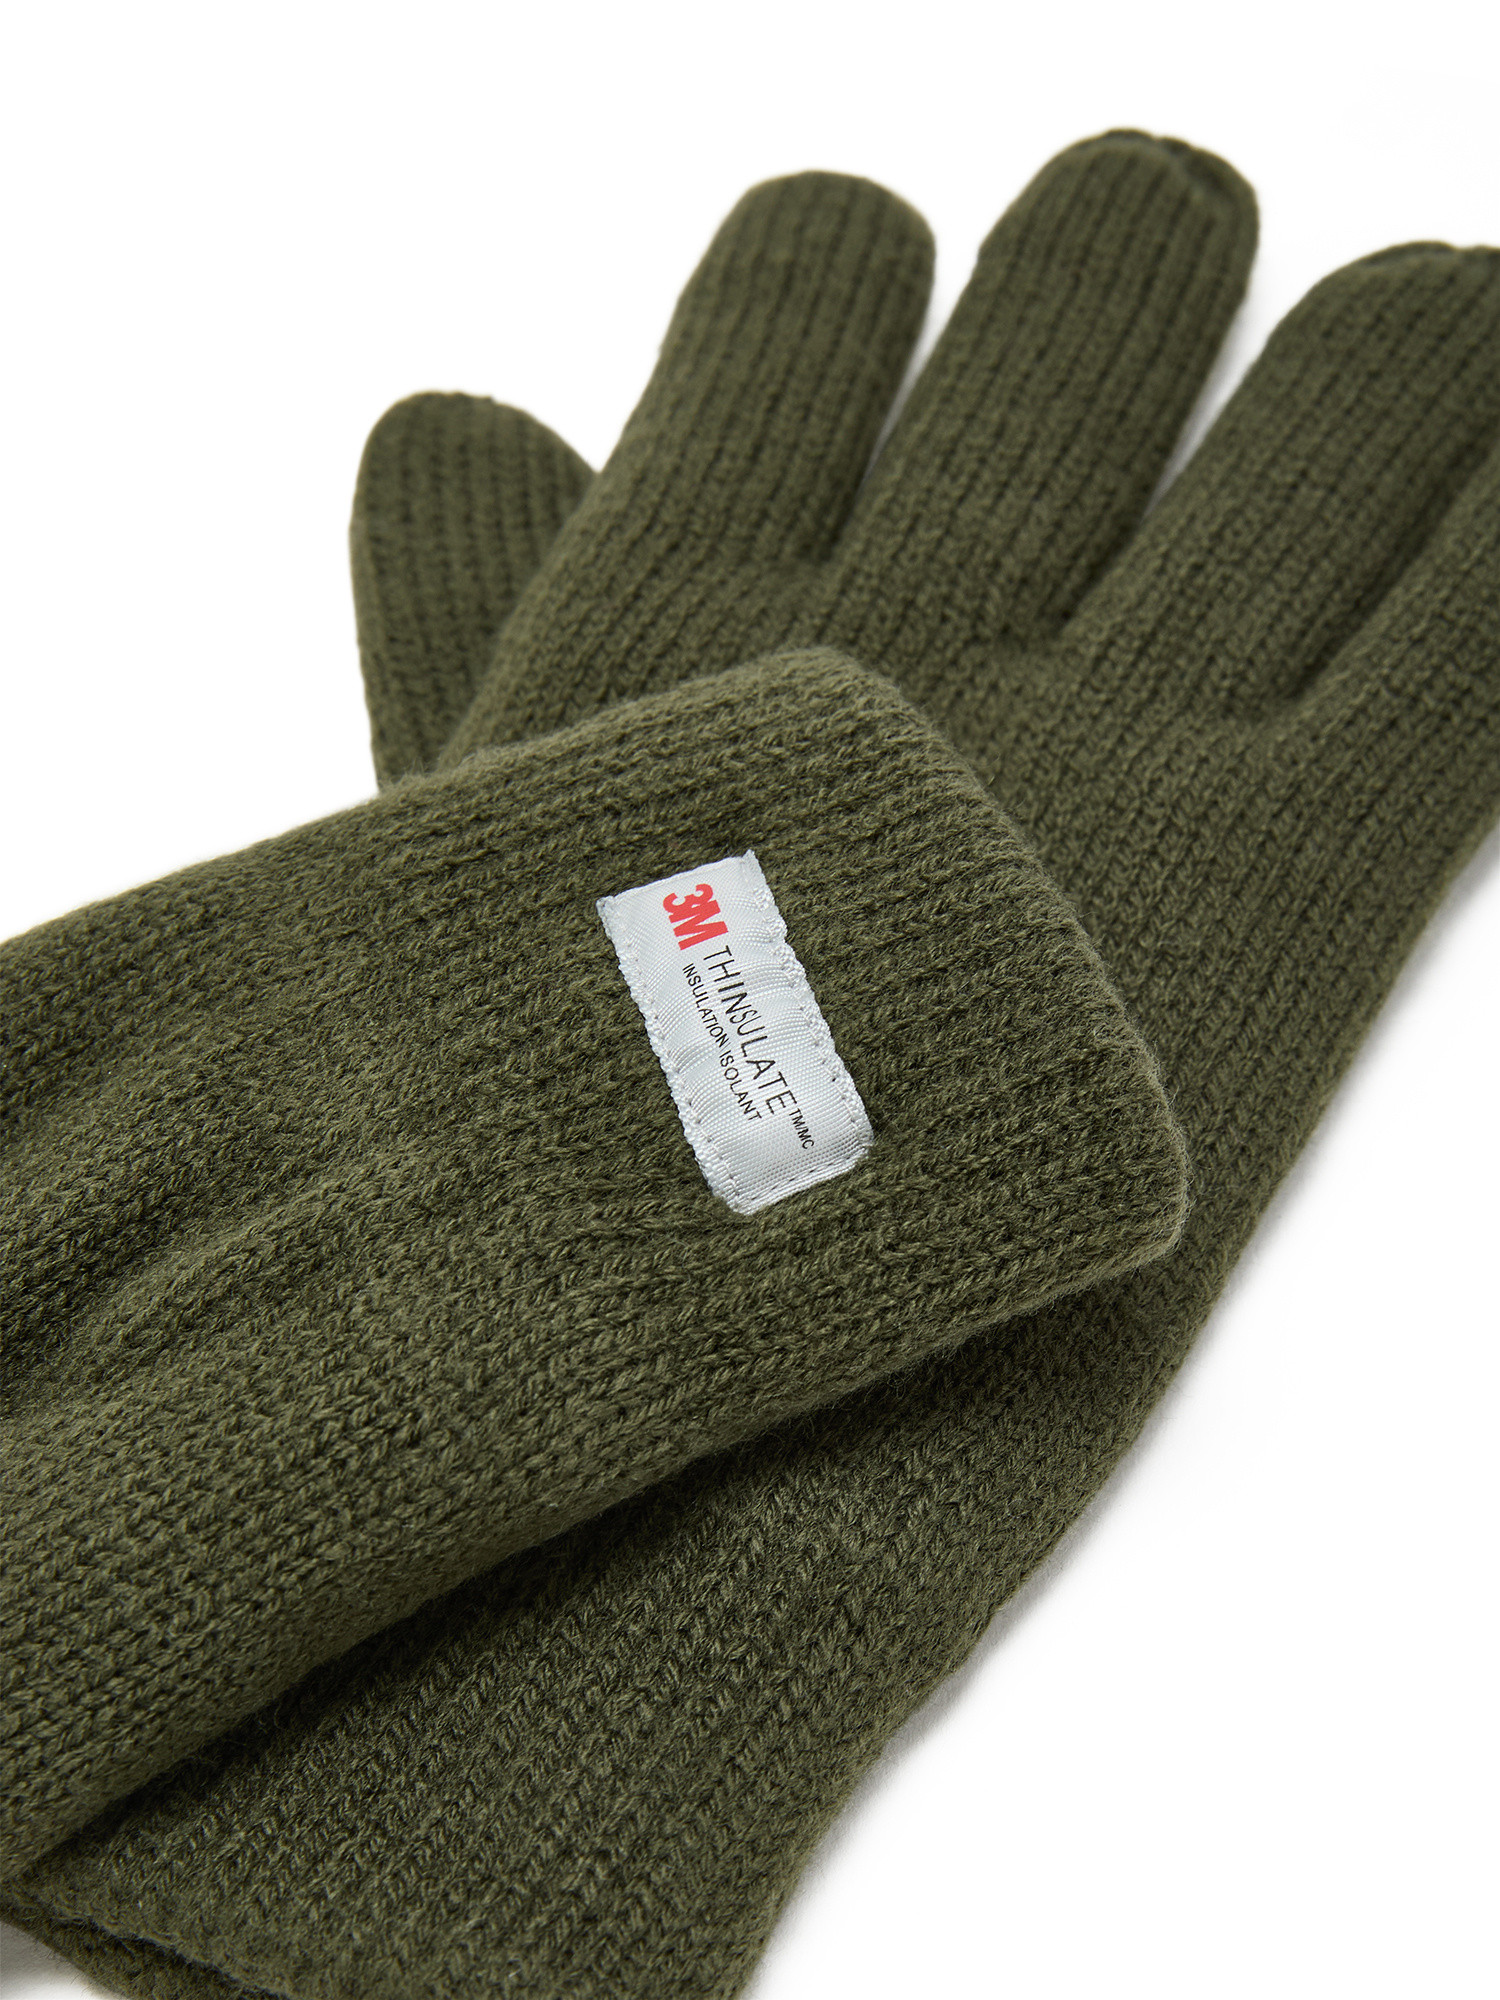 Luca D'Altieri - Knitted gloves, Olive Green, large image number 1